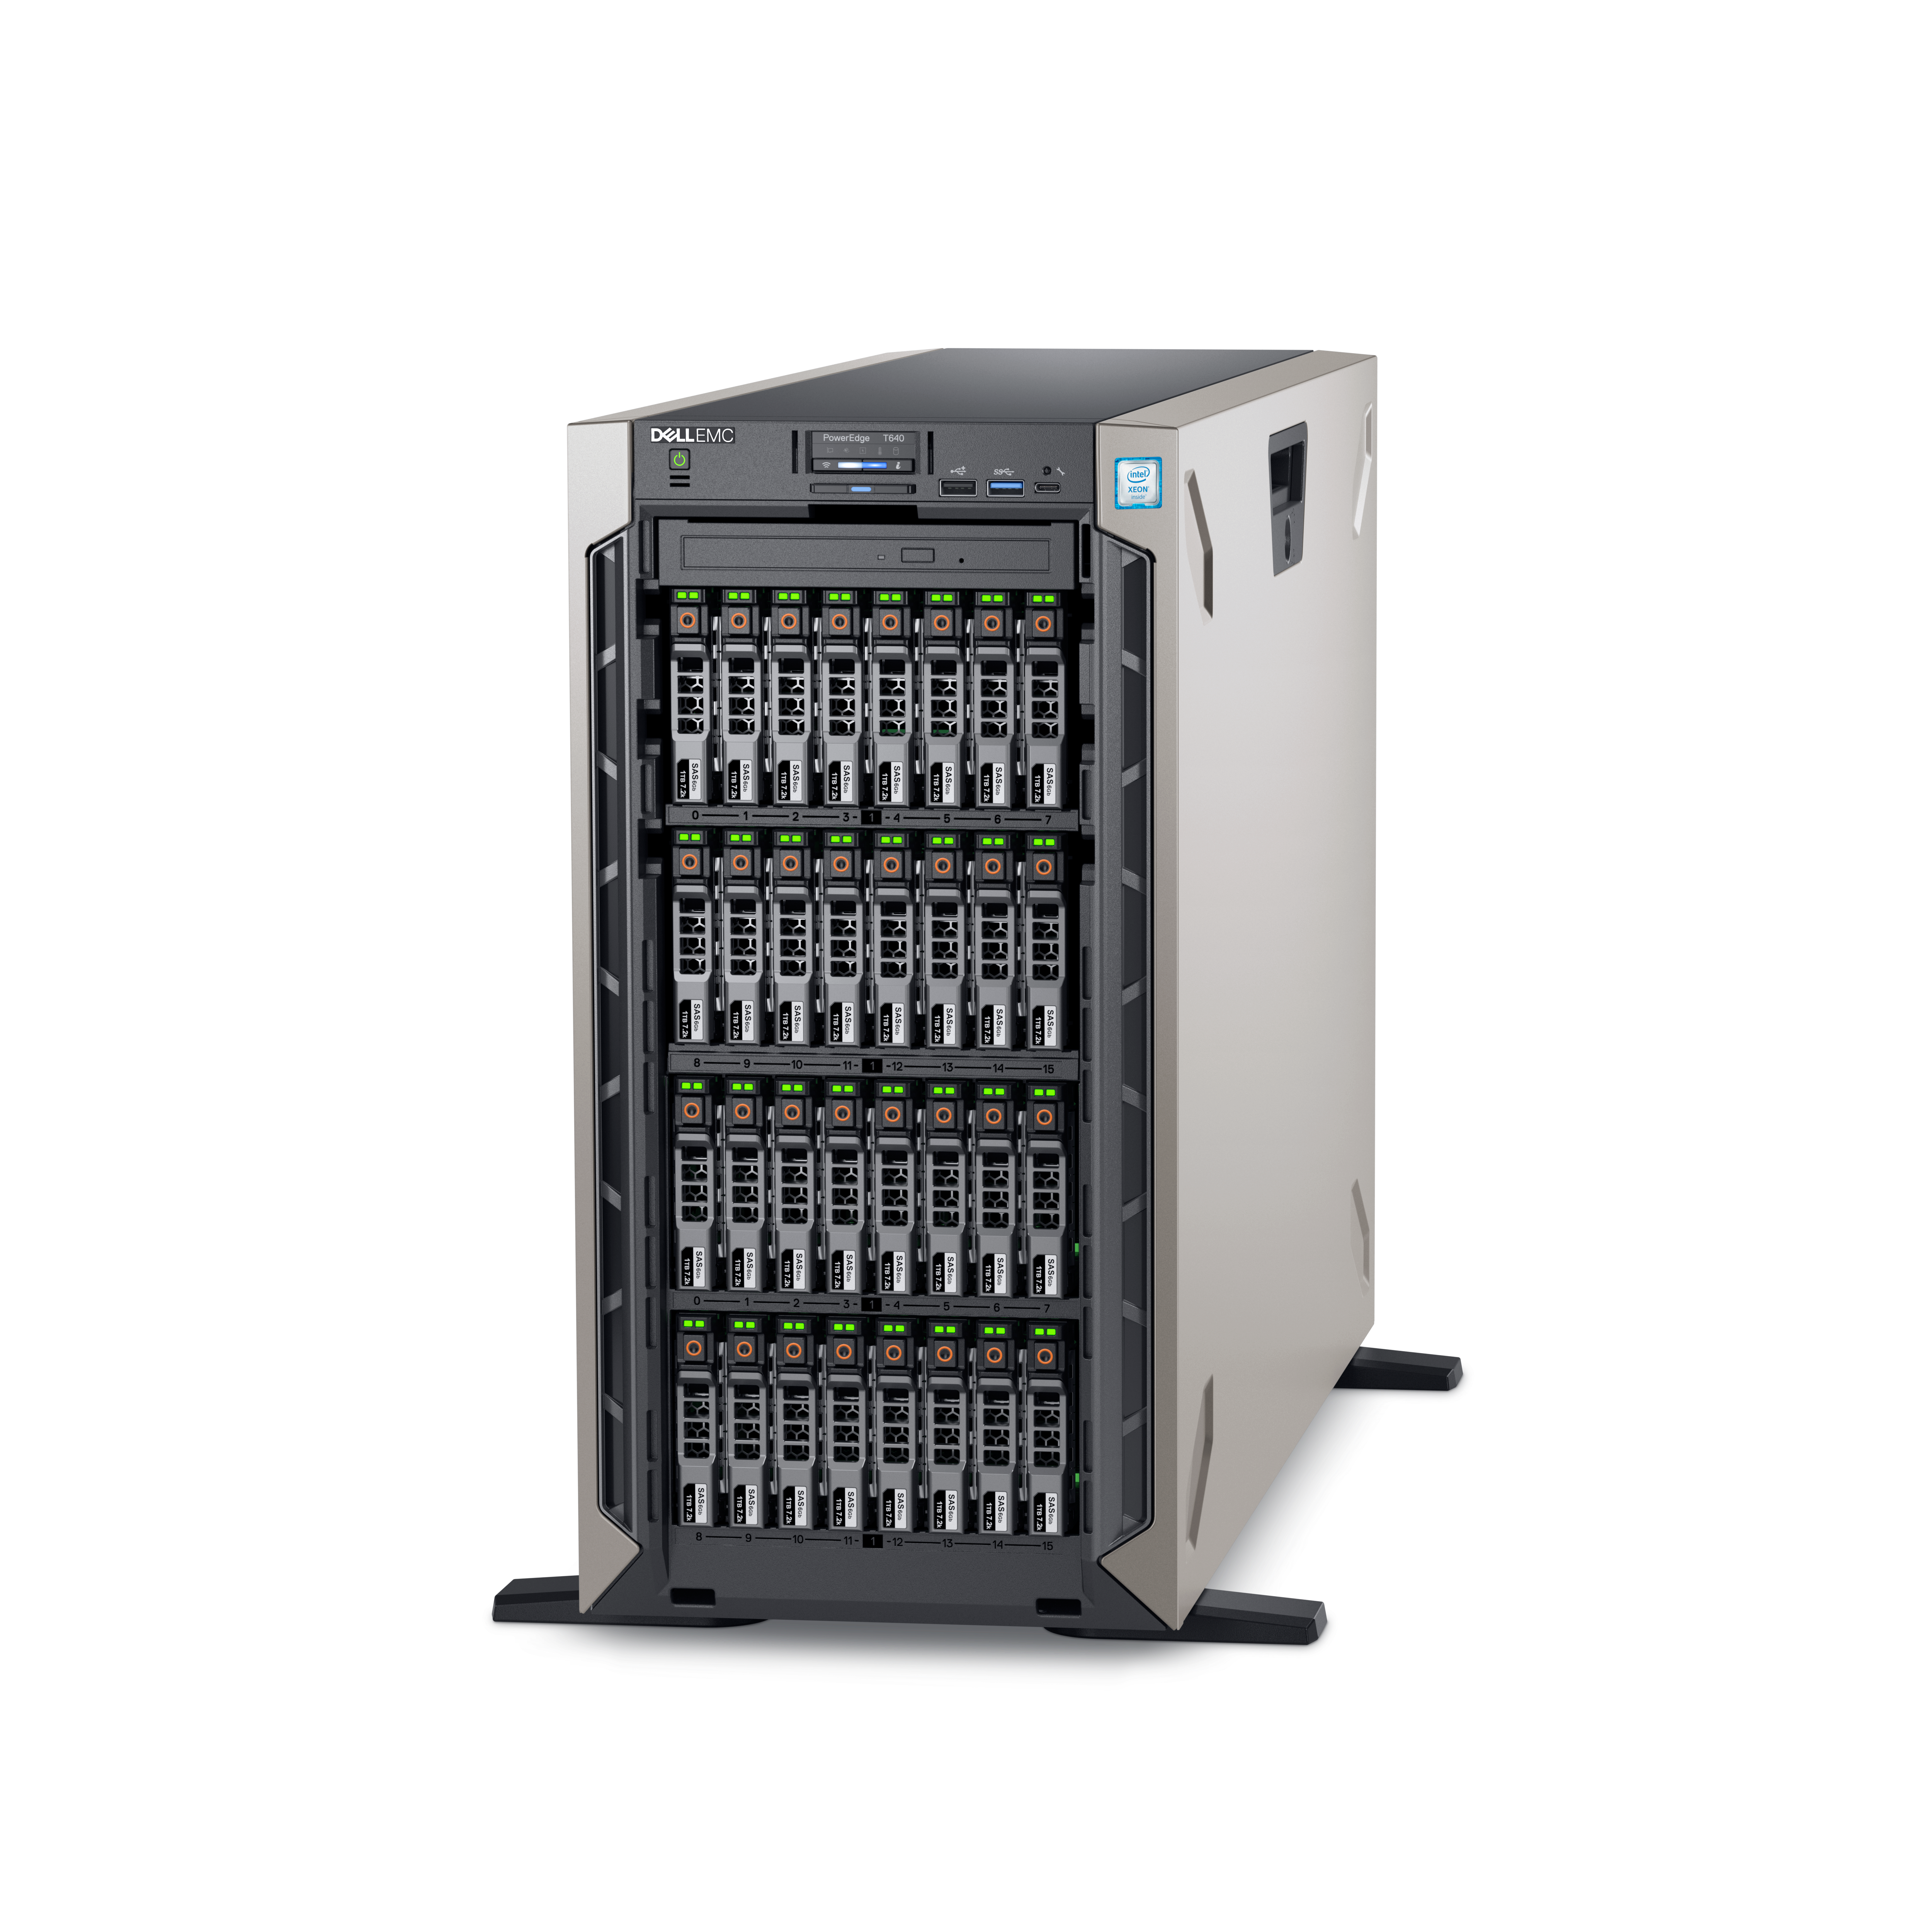 PowerEdge T640 Tower Server | Dell USA